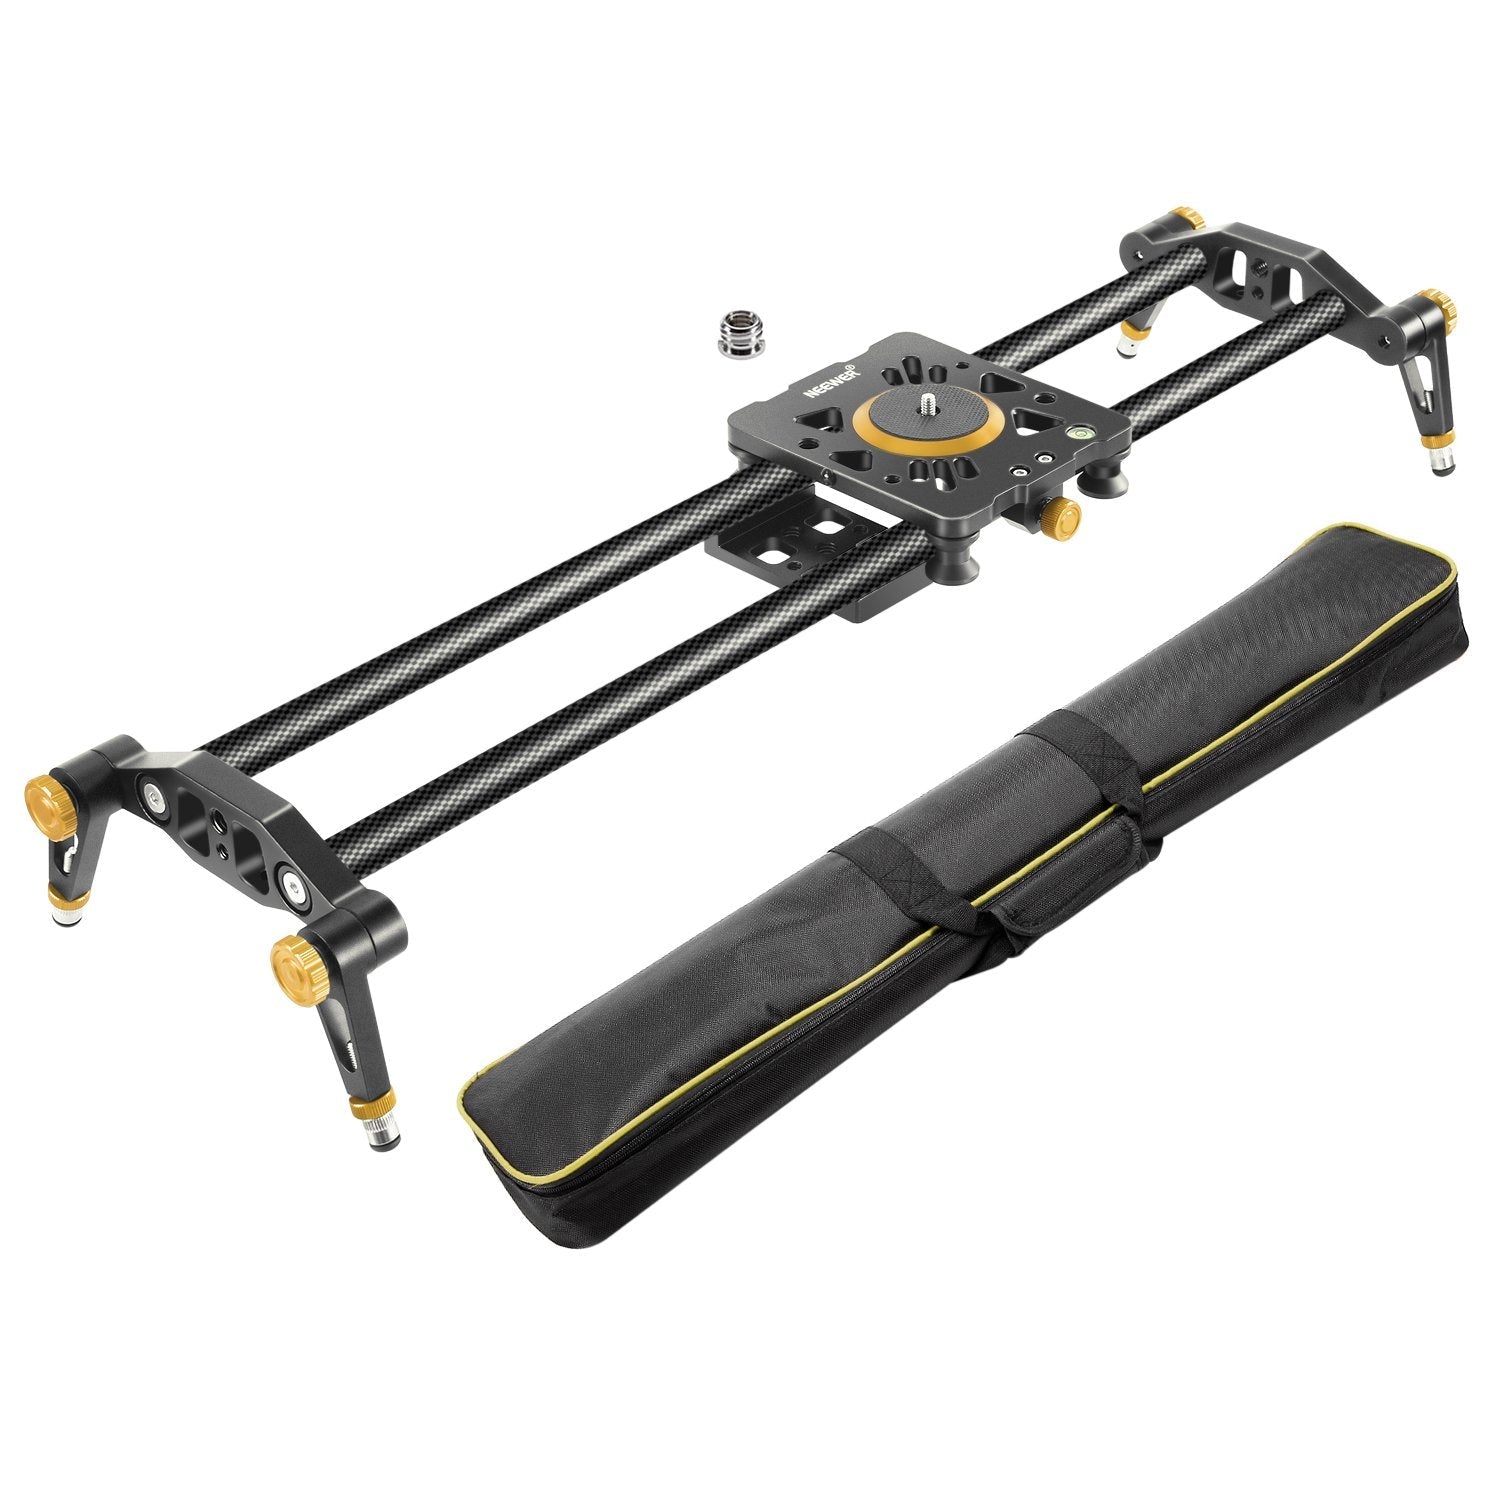 Neewer Carbon Fiber Camera Track Slider Video Stabilizer Rail with 6 Bearings for DSLR Camera DV Video Camcorder Film Photography - neewer.com